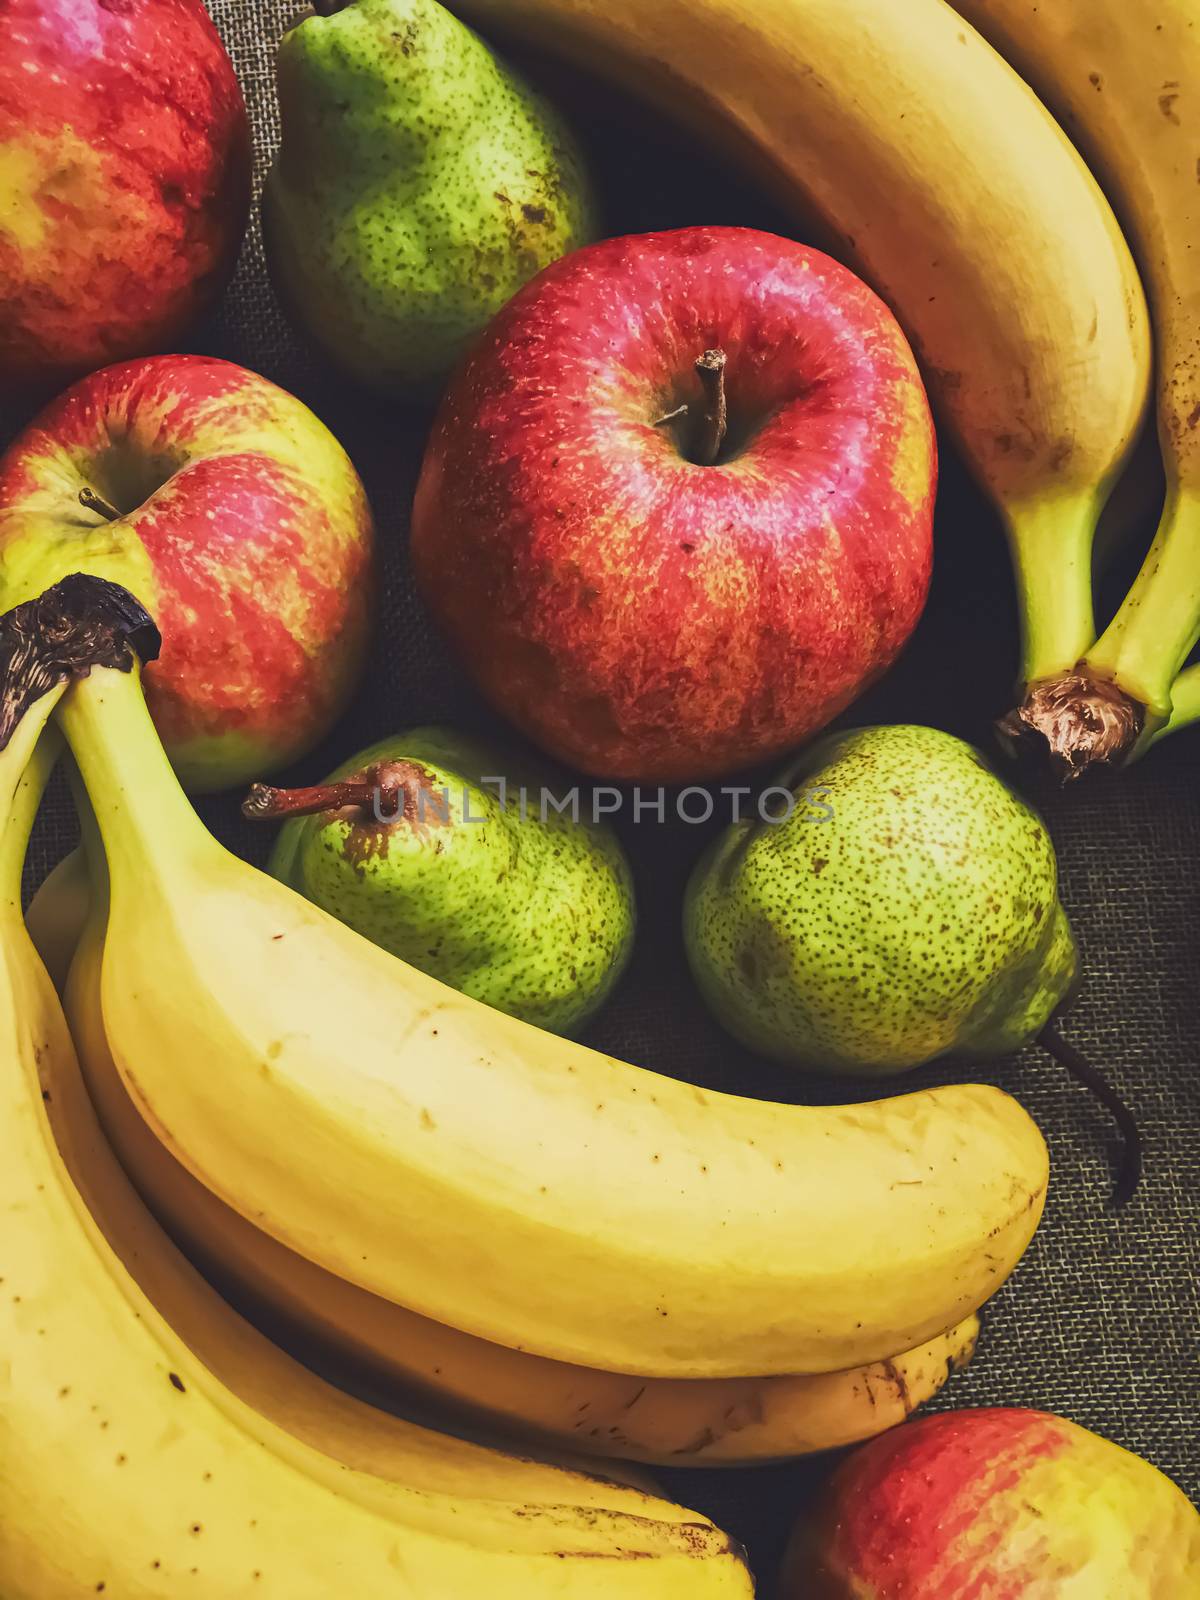 Organic apples, pears and bananas on rustic linen background by Anneleven